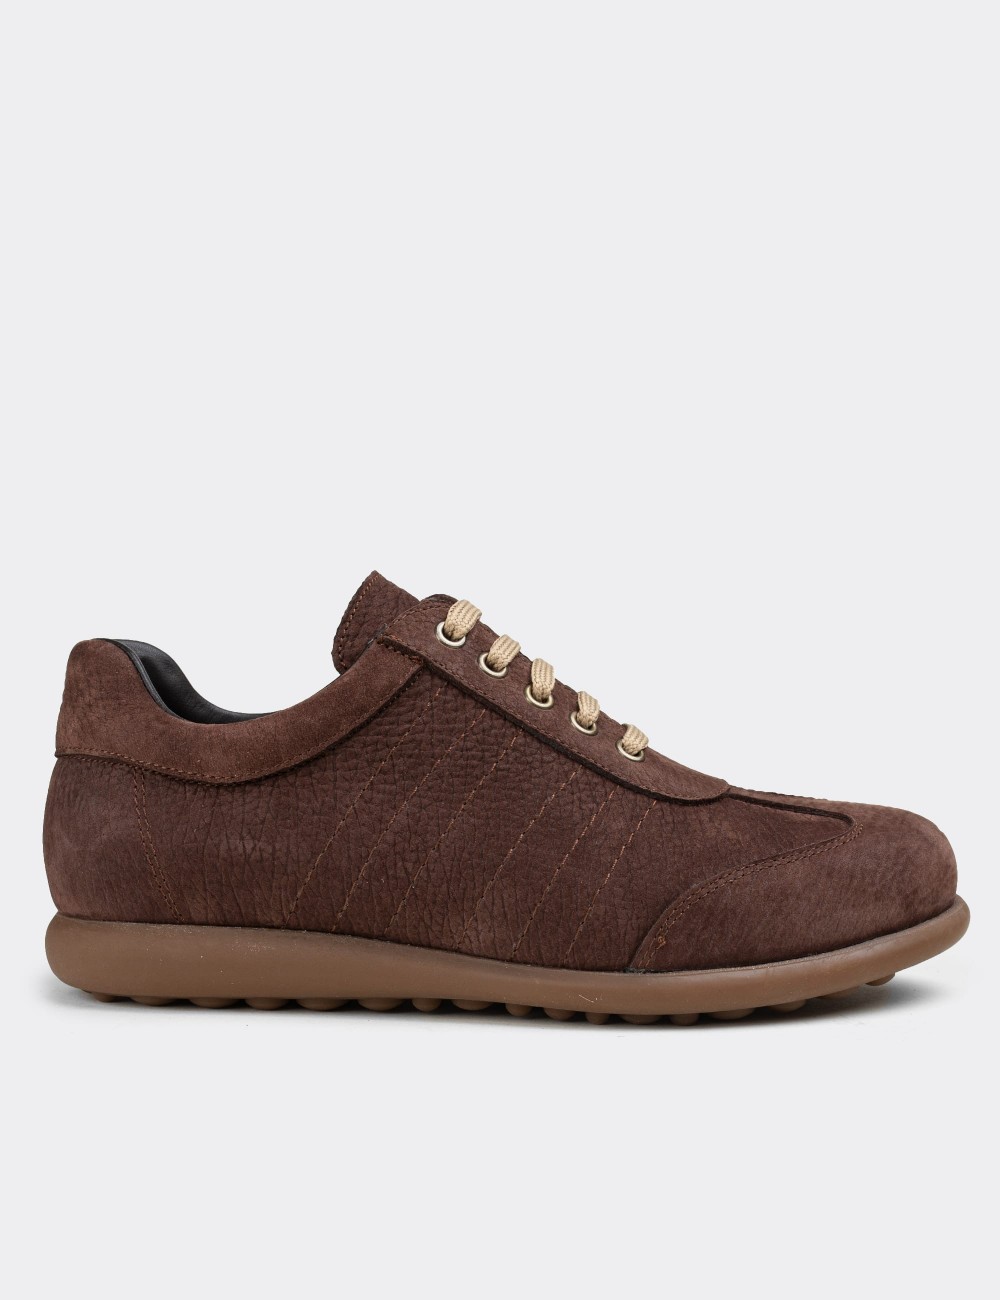 Brown Nubuck Leather Lace-up Shoes - 01826MKHVC04